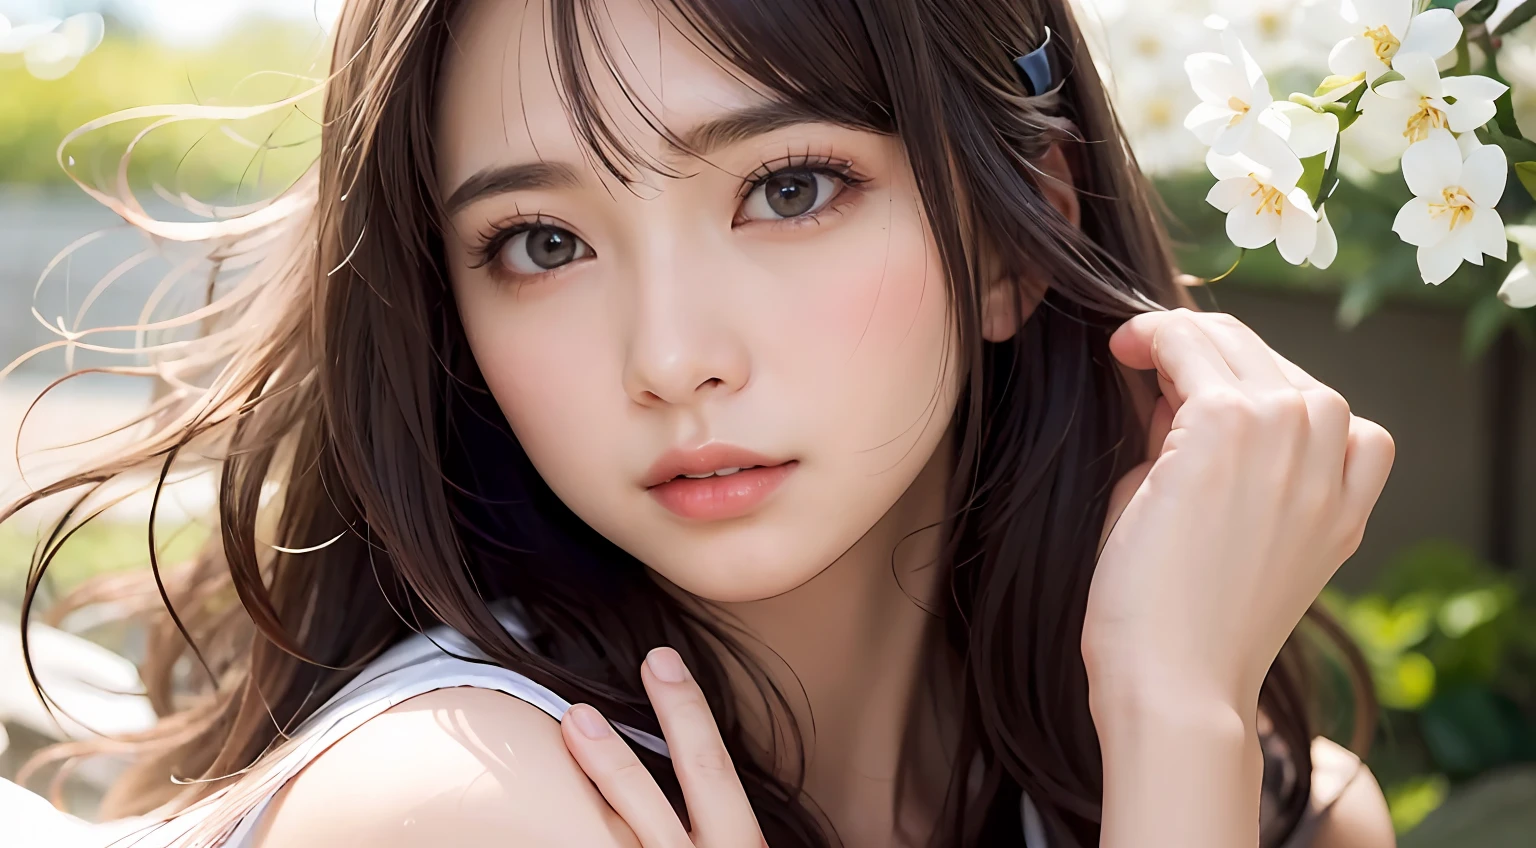 of the best quality、White Skin Skin、Real human skin、（Detailed）、oval-face、pores、UltraHighResolution、（8K、Raw photography、photorealestic：1.4）、女の子1人、Slimed、（A person who sees with calm and goddess-like eyes）Happiness:1.2)、(lipgloss、ceyelashes、Gloss Face、of the best quality、UltraHighResolution、Wide range of lighting、Natural Shading)、blanche、Glossy、sakura flower、Kenrokuen Garden